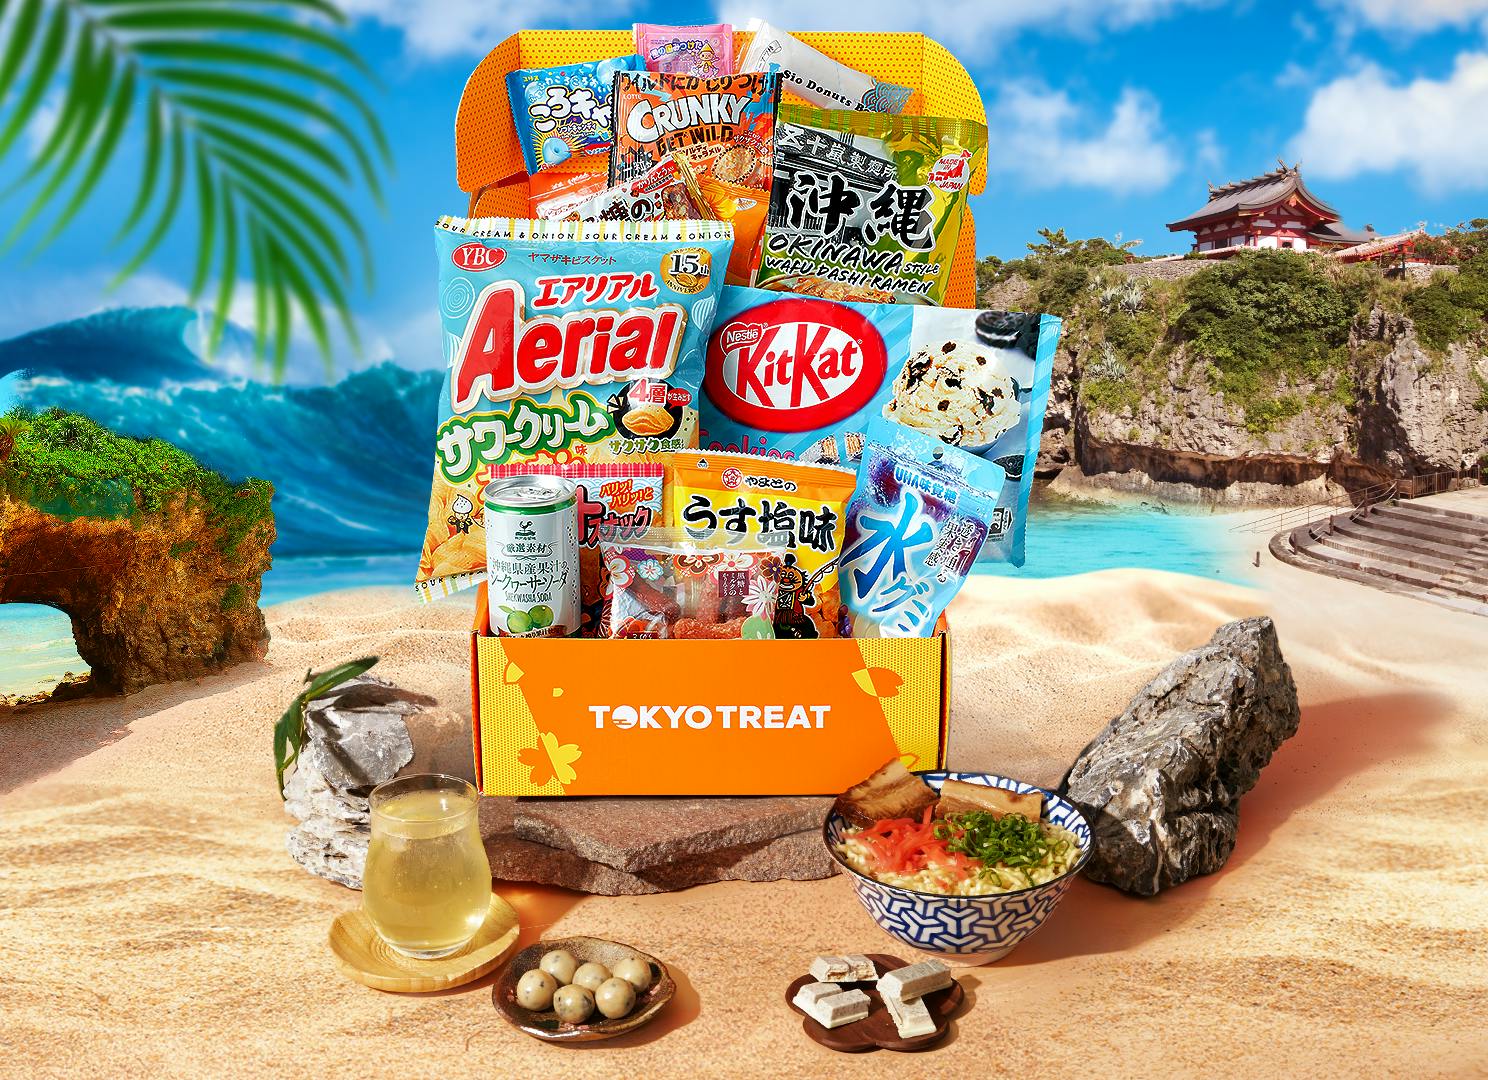 The Okinawa Snackin' Oasis box sits against a backdrop of a beach in Okinawa, with waves and an Okinawa castle in the background.